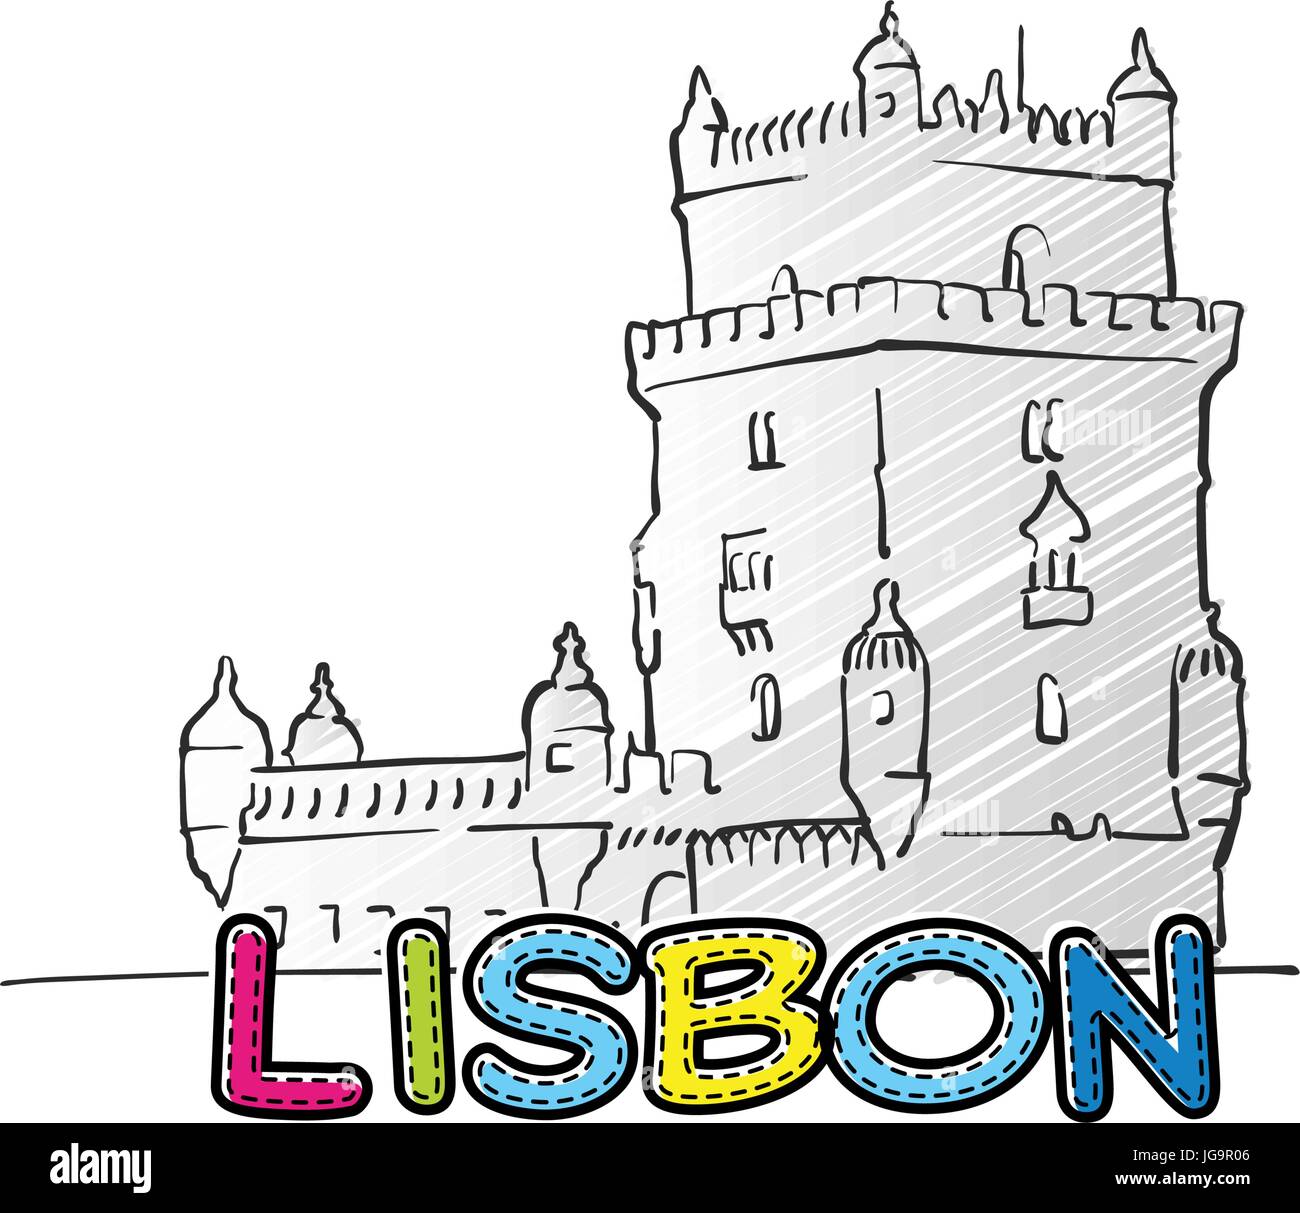 Lisbon beautiful sketched icon, famaous hand-drawn landmark, city name lettering, vector illustration Stock Vector